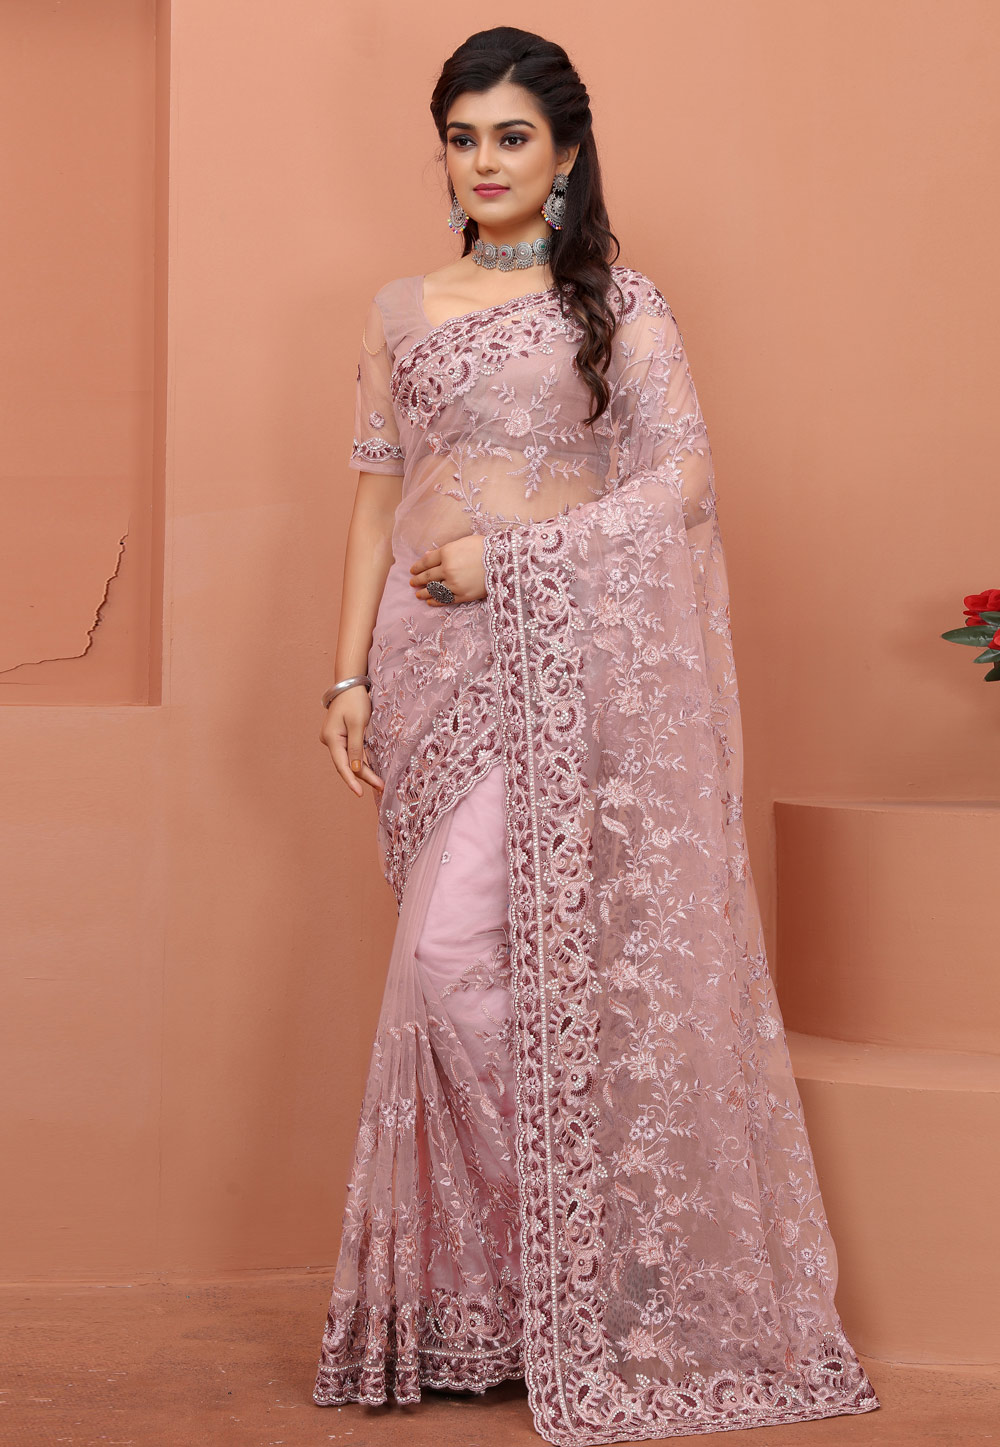 10 Best Saree Draping Ideas to try out this Teej 2021 - Mompreneur Circle